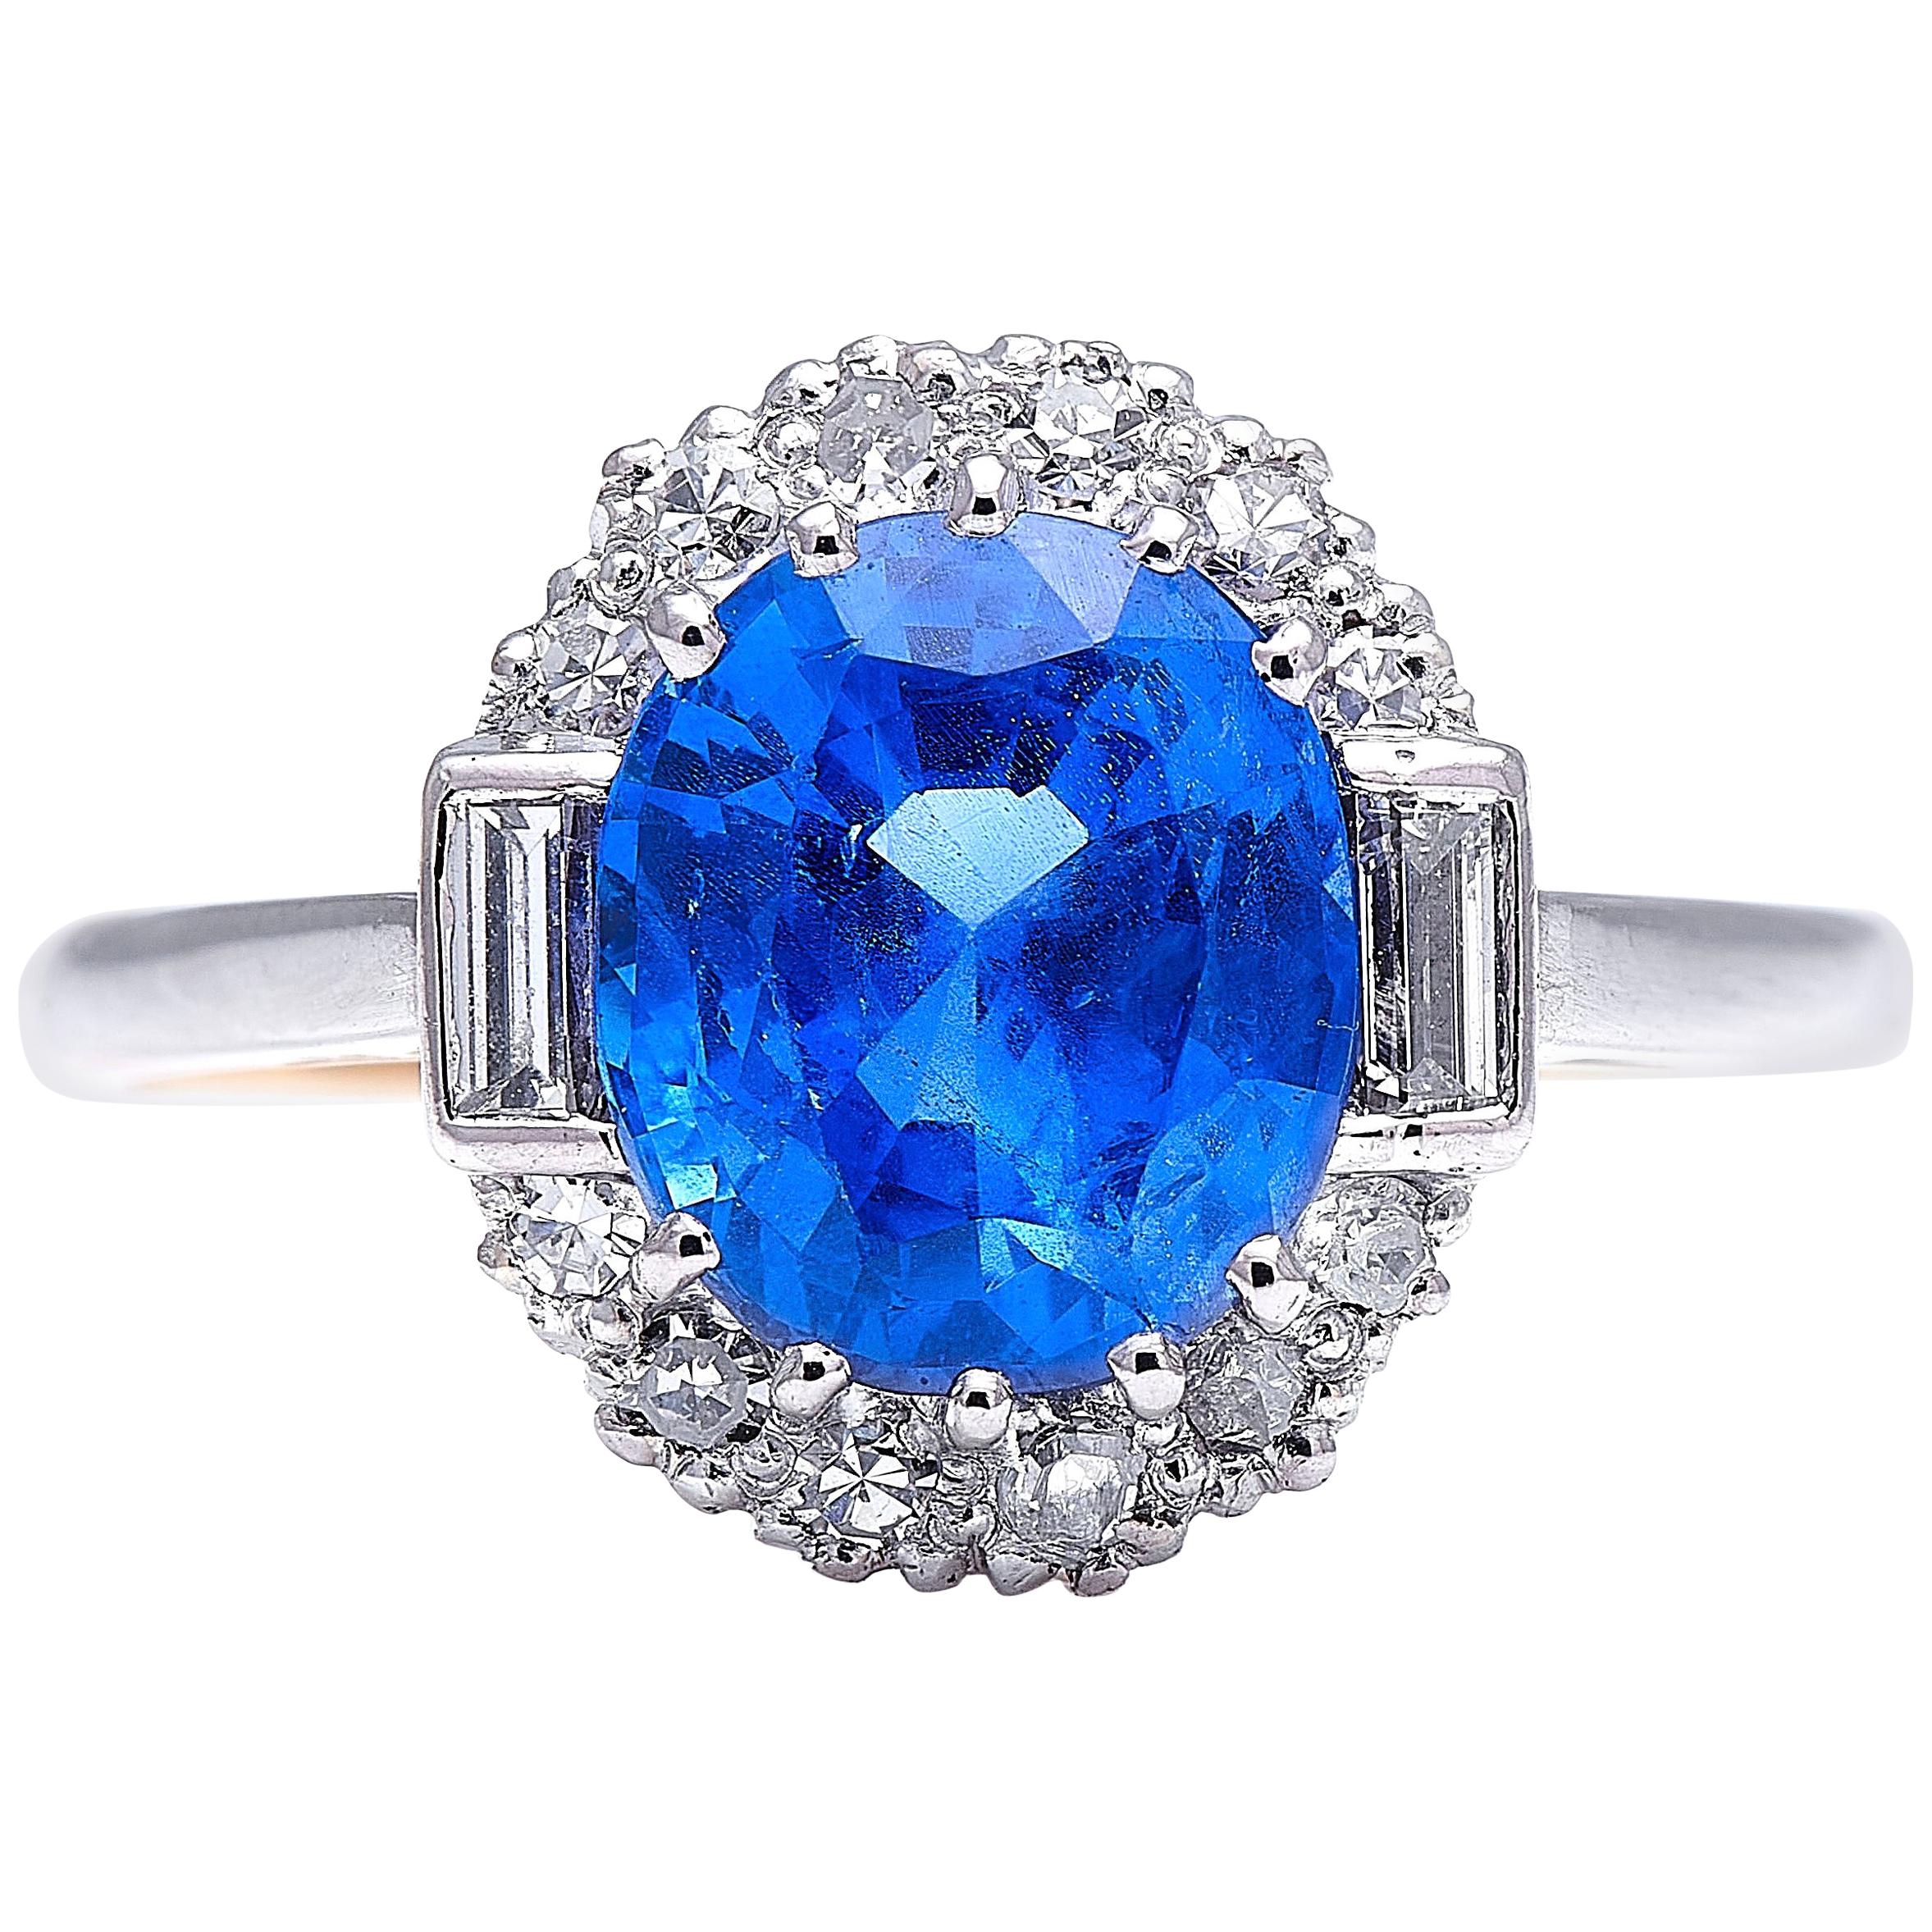 Antique, Art Deco, 18 Carat Gold, Burmese Sapphire and Diamond Cluster Ring For Sale